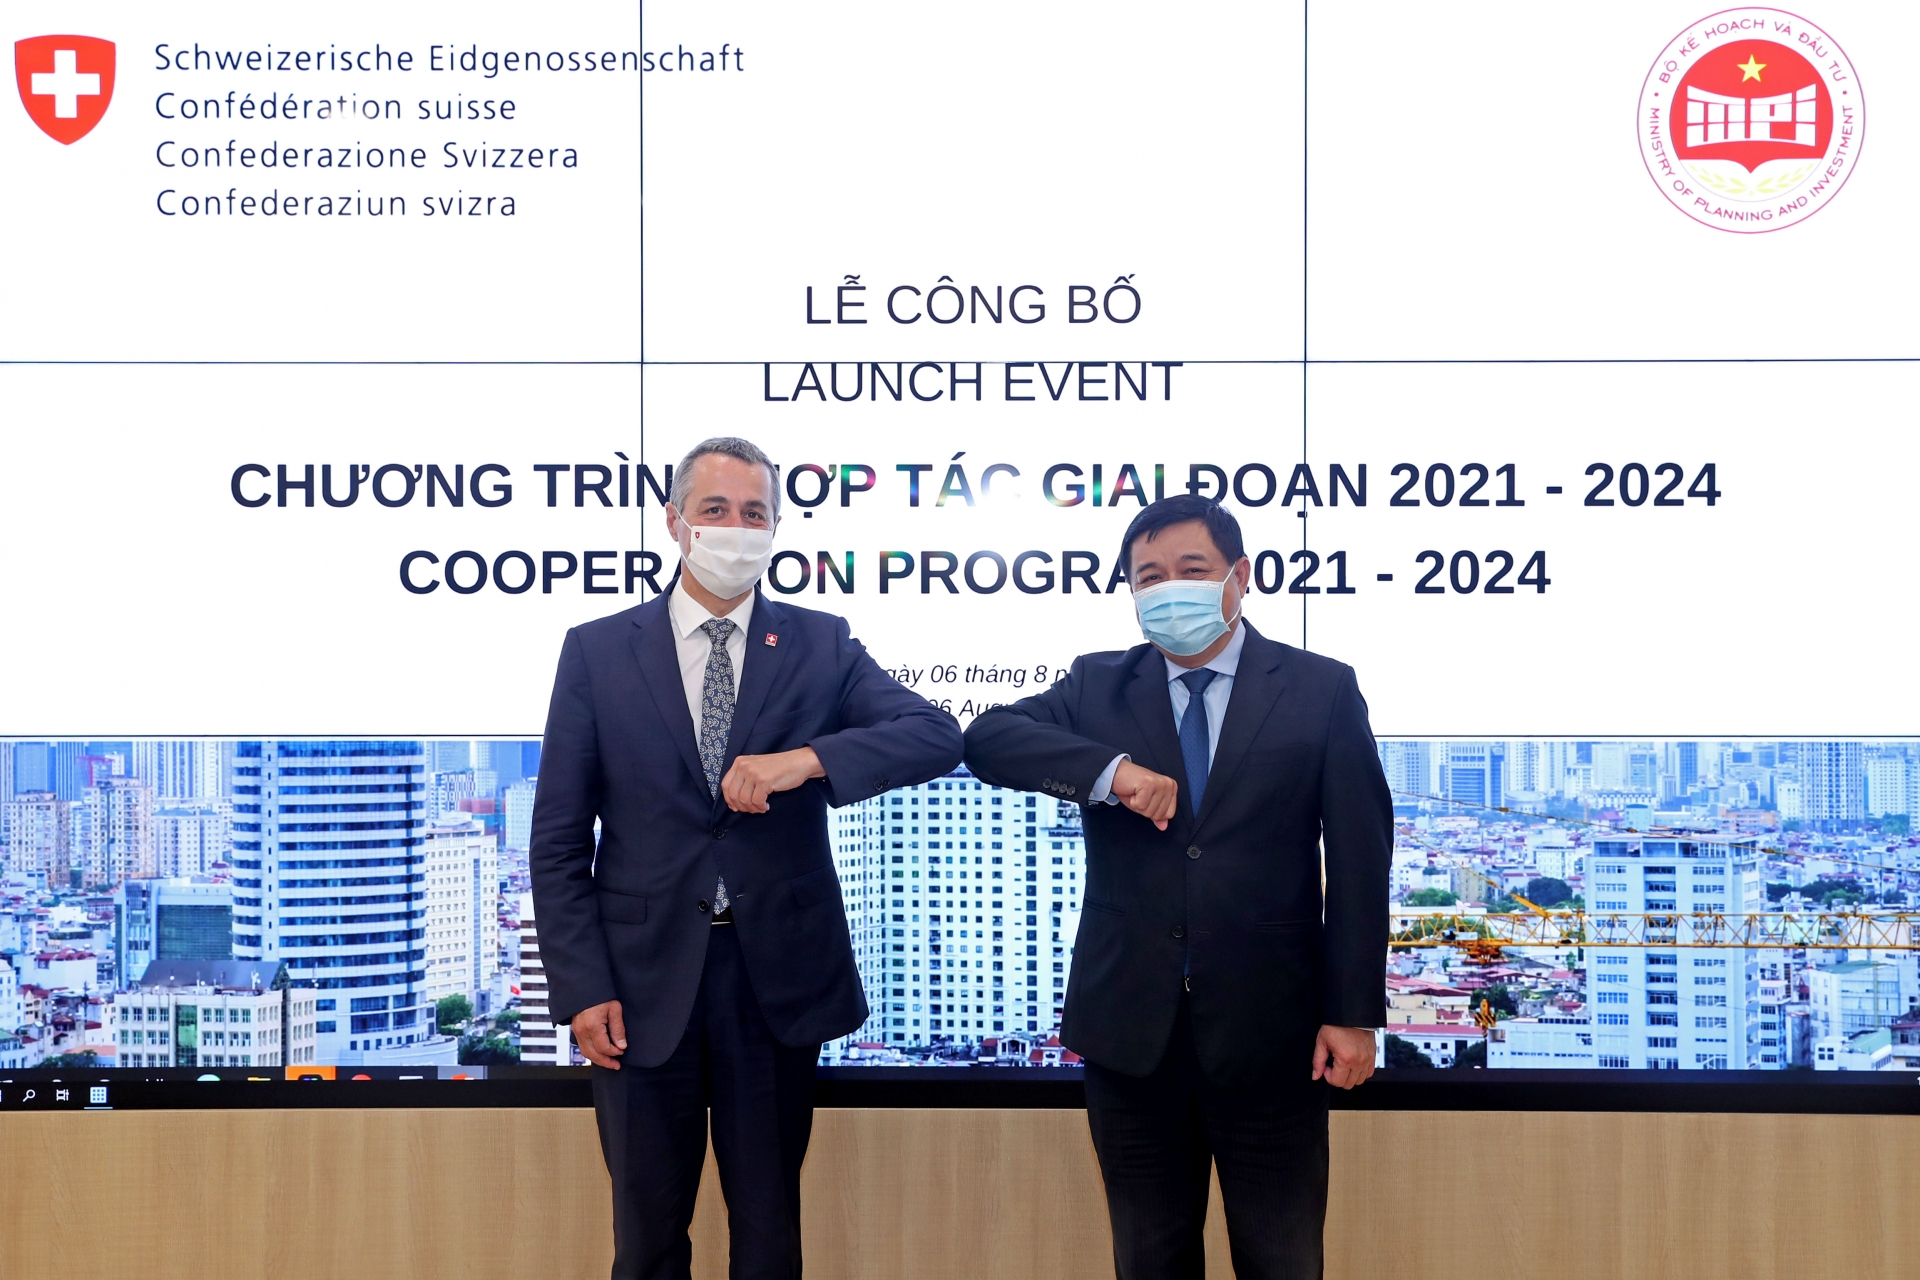 Switzerland launches its new cooperation programme for the period of 2021-2024 with Vietnam